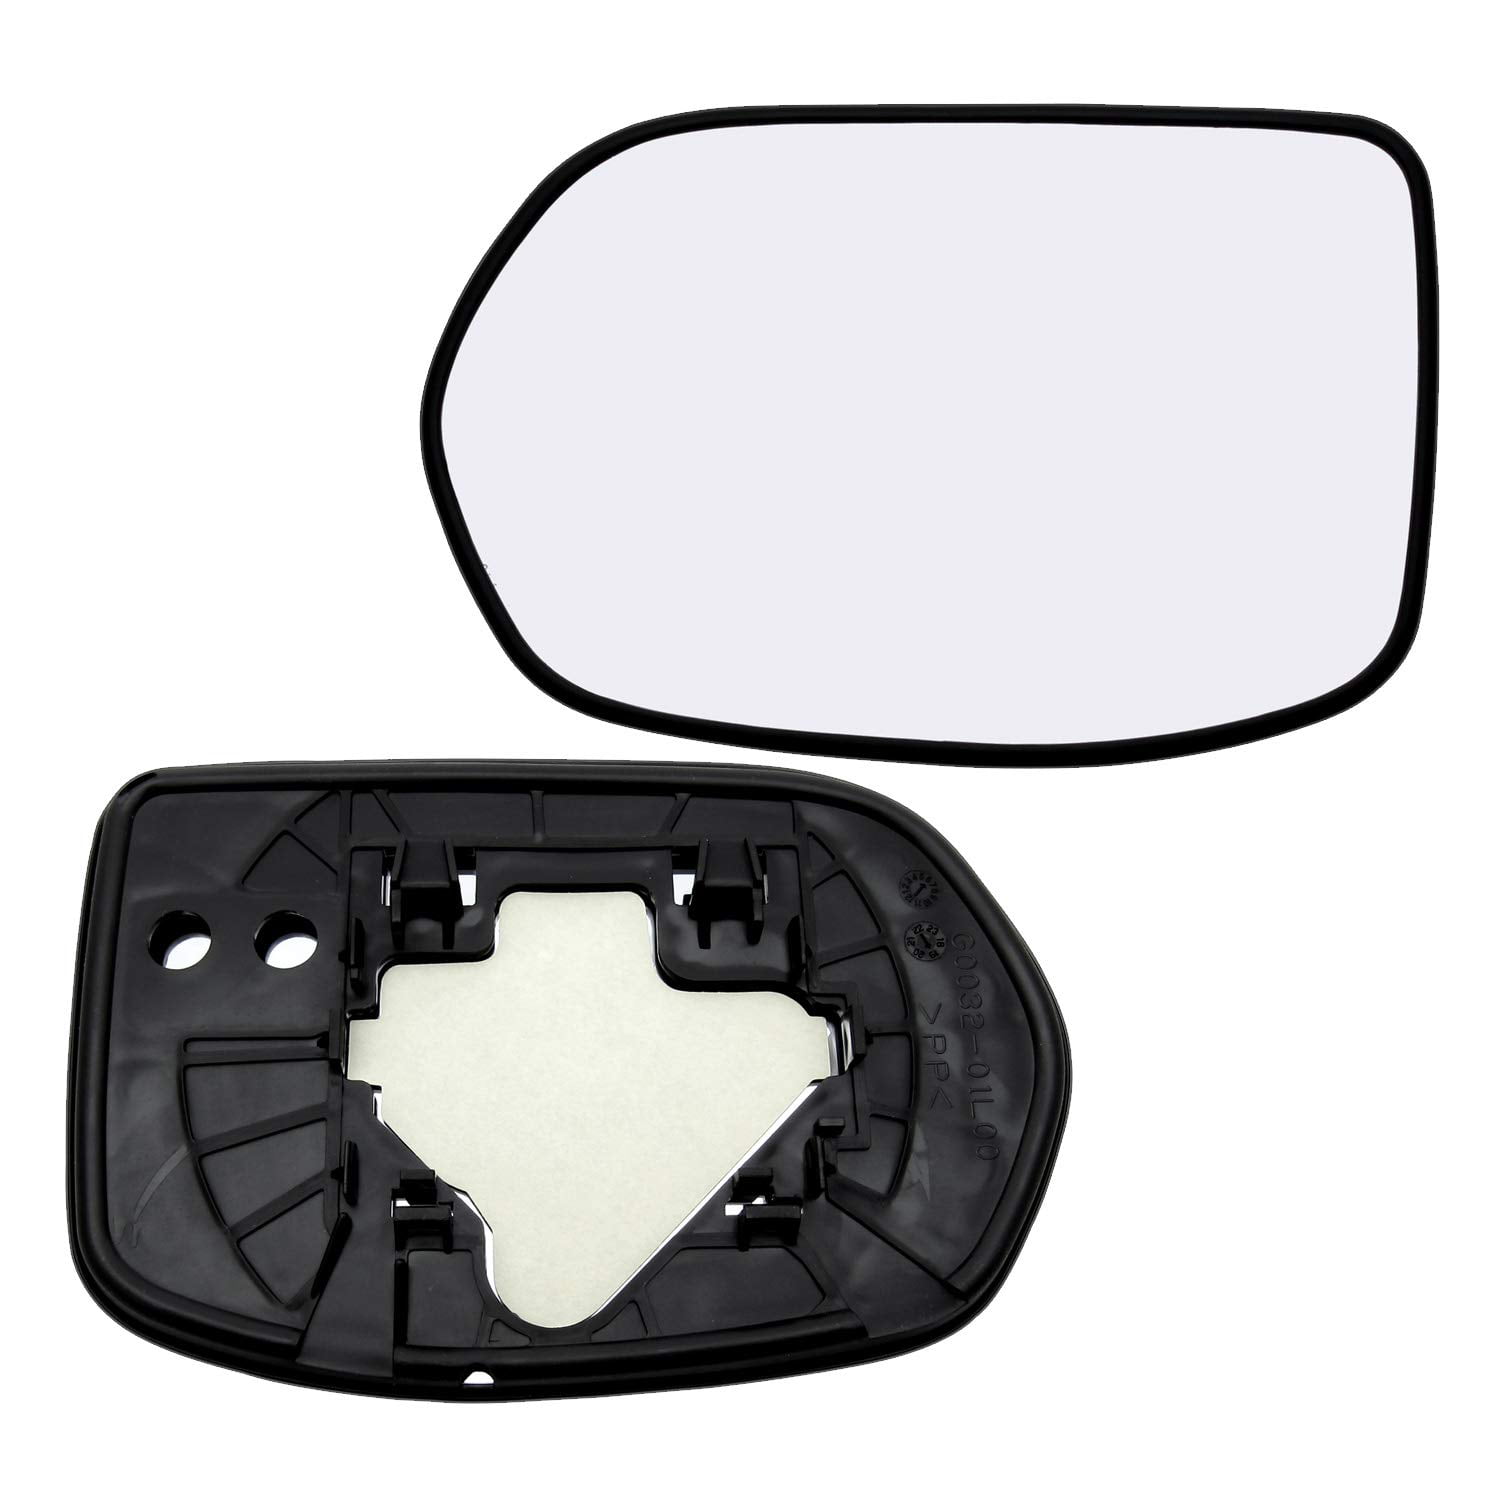 New Replacement Passenger Side Mirror Glass W Backing Compatible With 2007 2008 2009 2010 2011 Honda CR-V CRV Sold By Rugged TUFF 